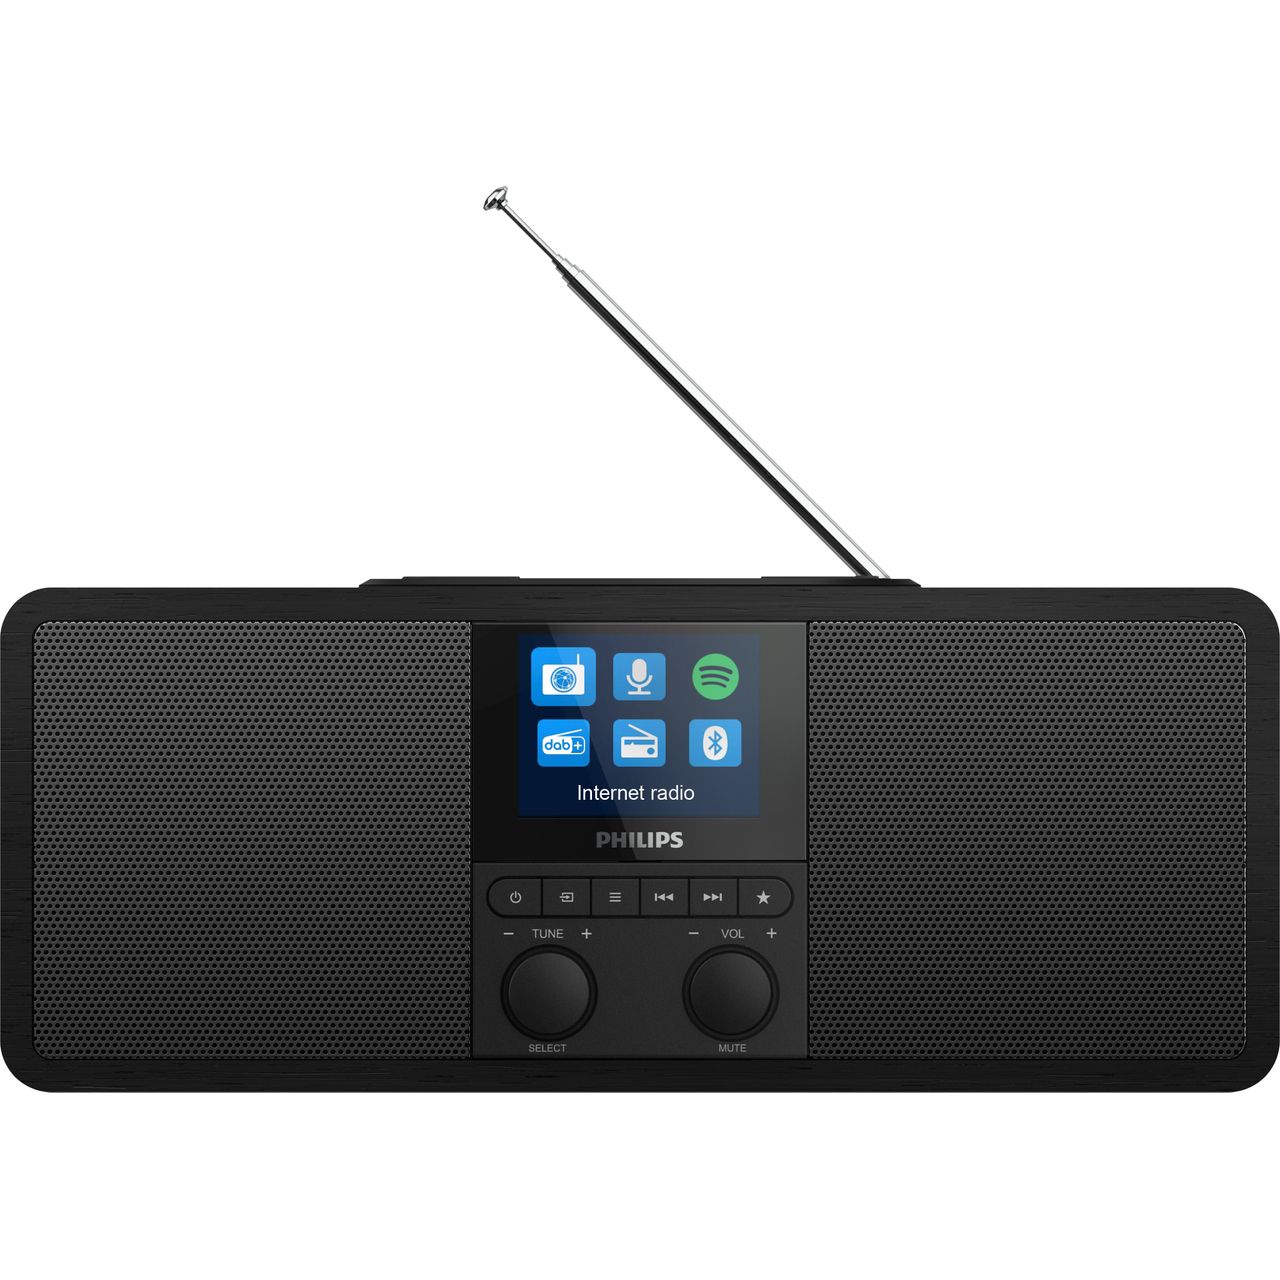 Philips TAR8805 DAB+ Digital Radio with FM Tuner Review